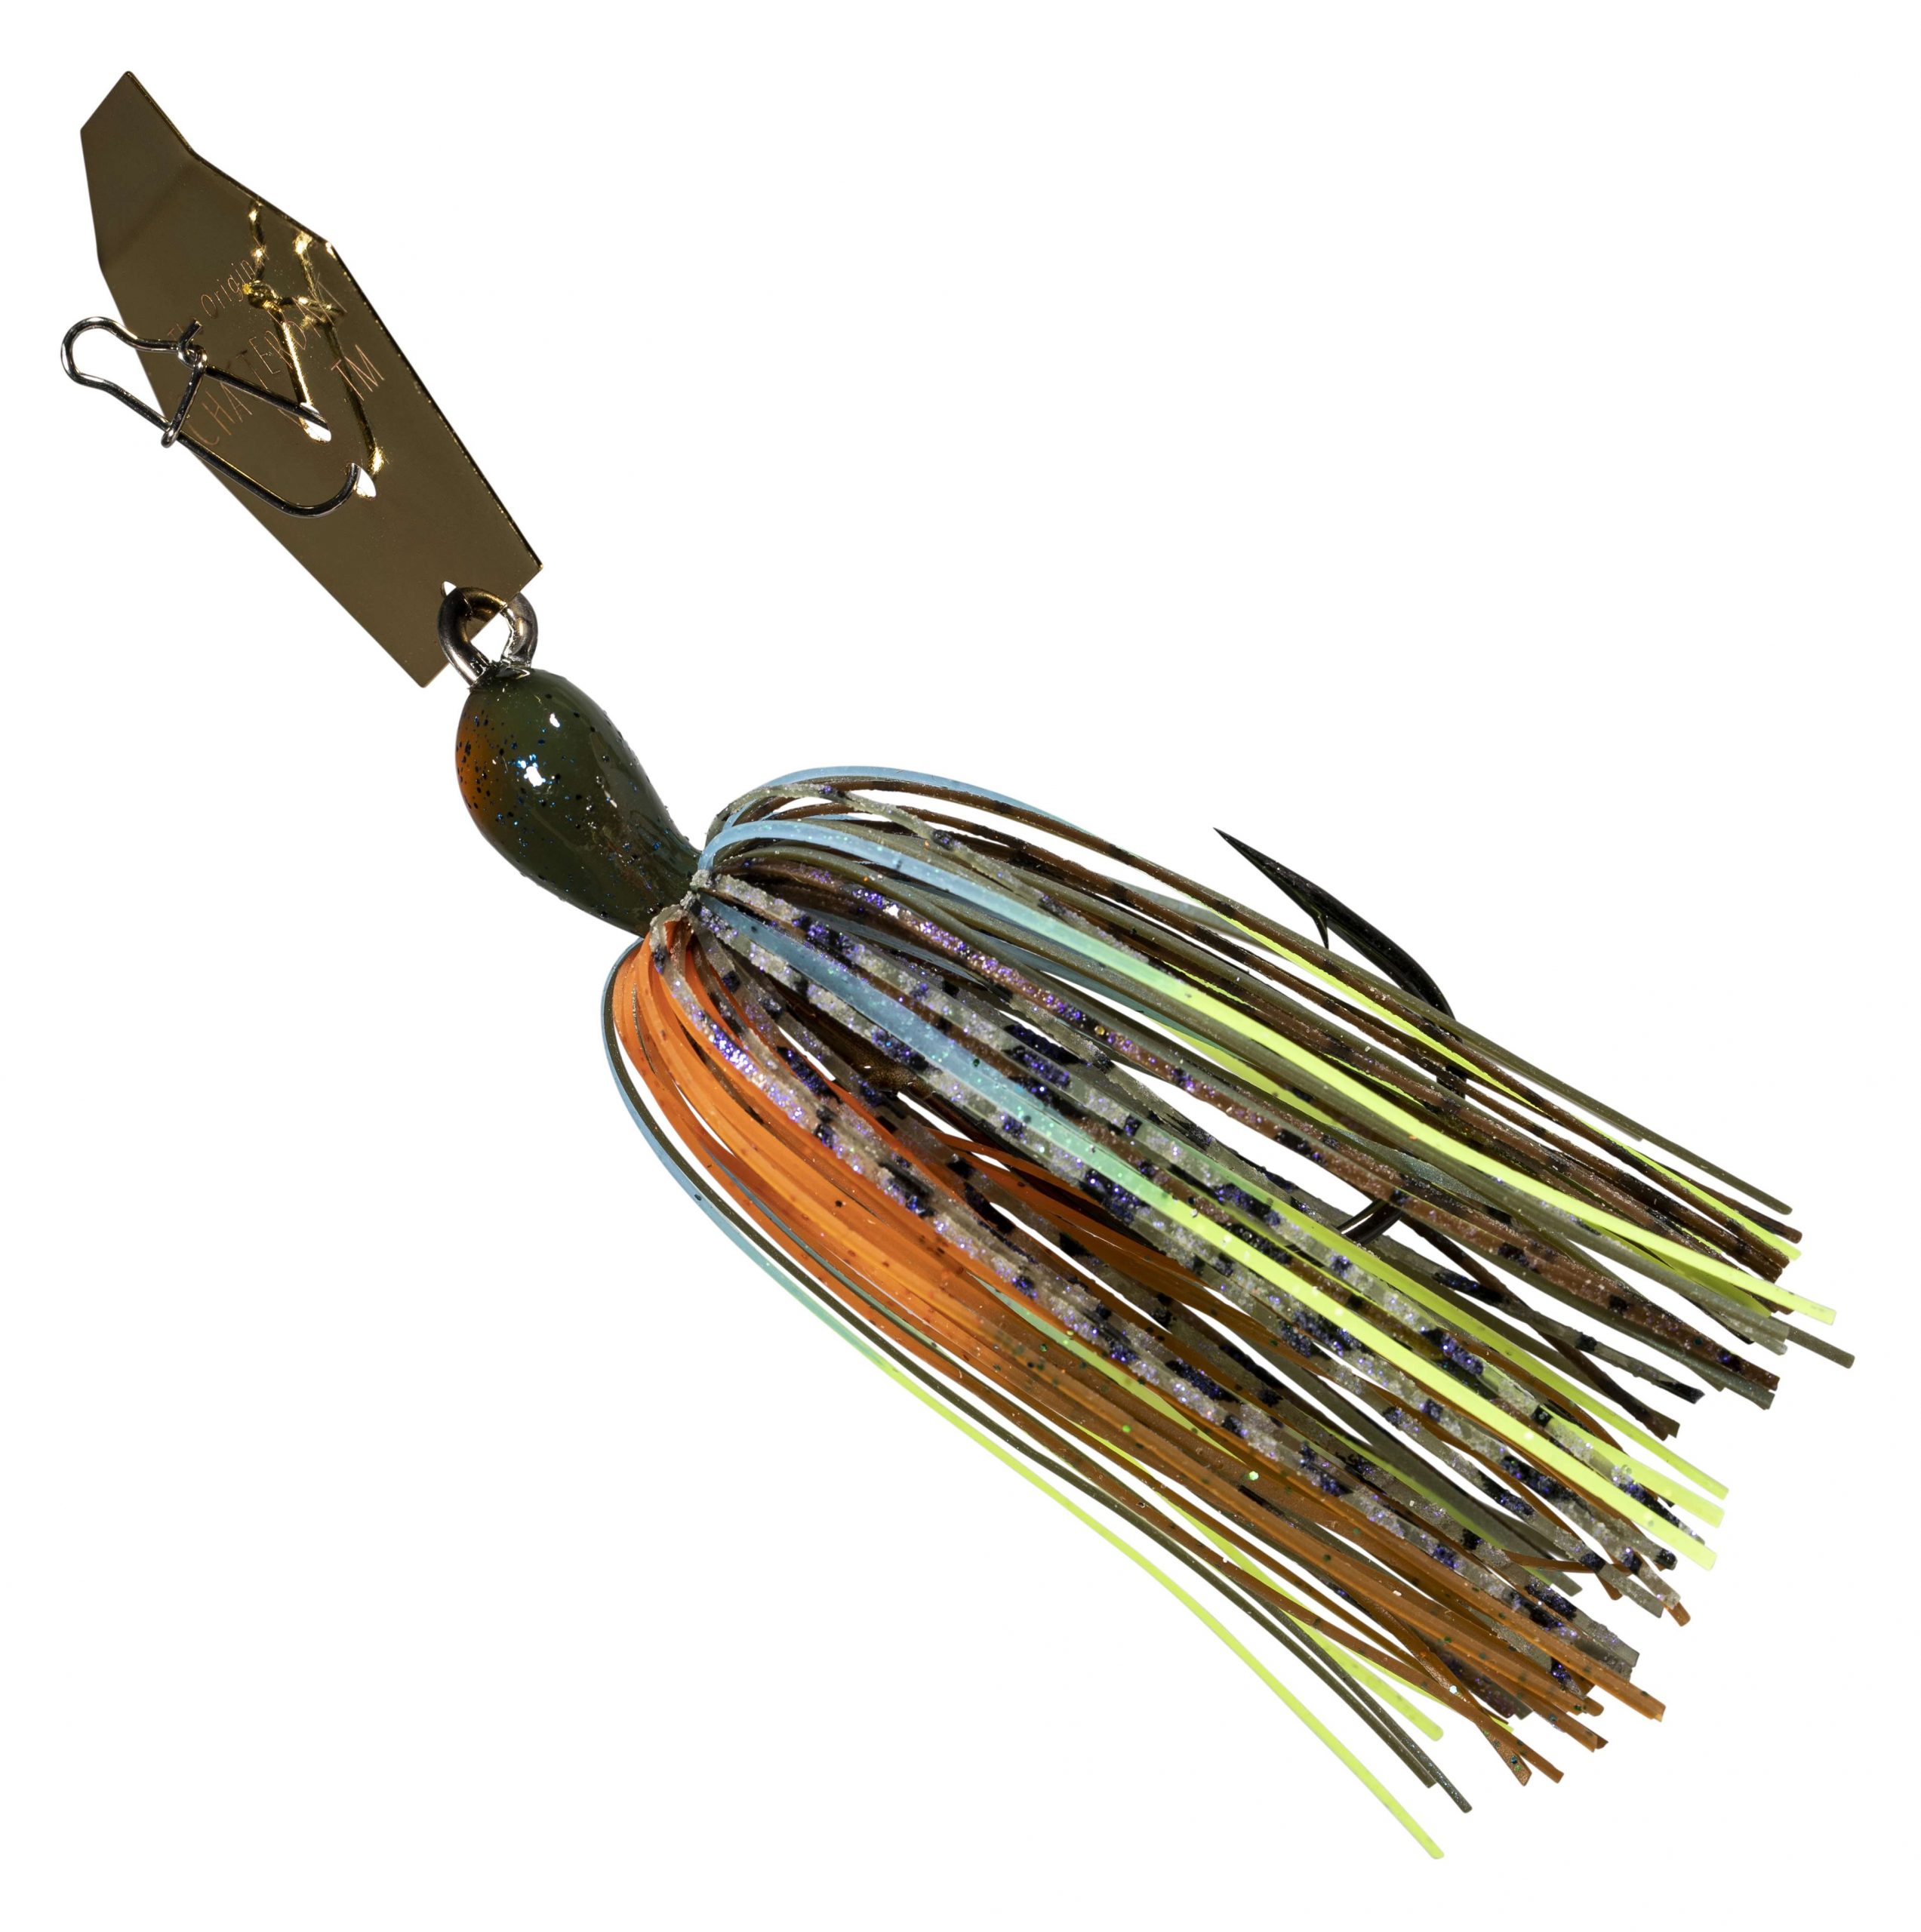 The new Z-Man Big Blade ChatterBait features several radical new skirt configurations, wire-tied for the long-term and hand-picked by bladed jig expert Bryan Thrift. 